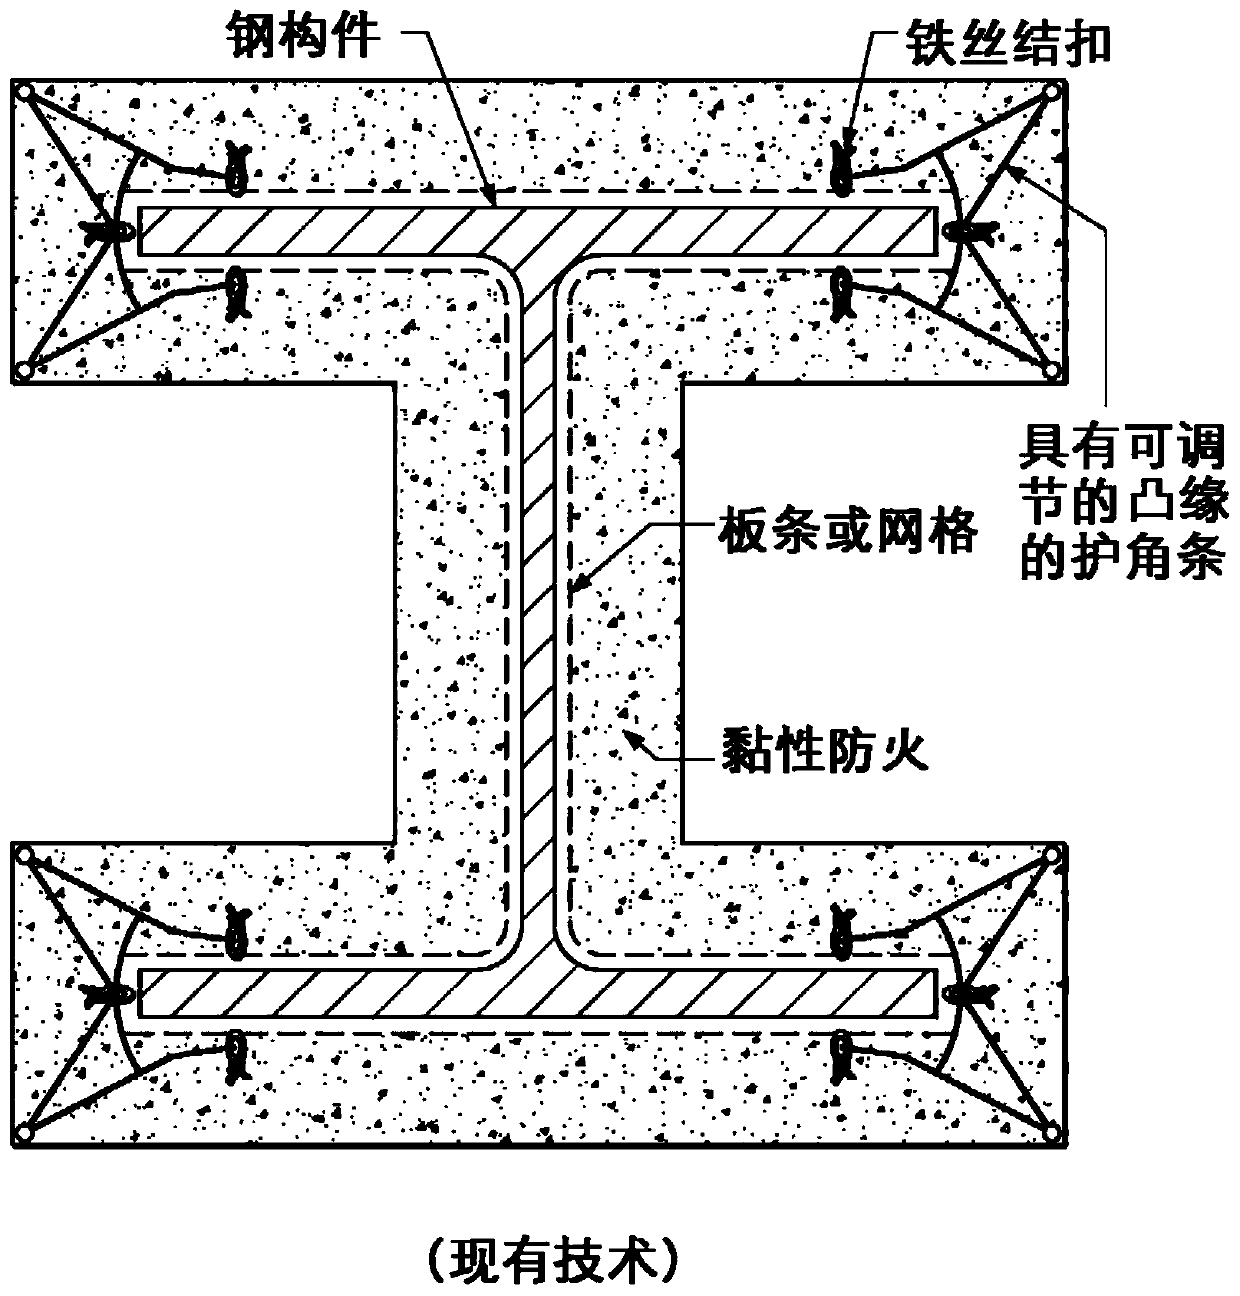 A method of fireproofing a component comprising a set of surfaces with a fireproofing material